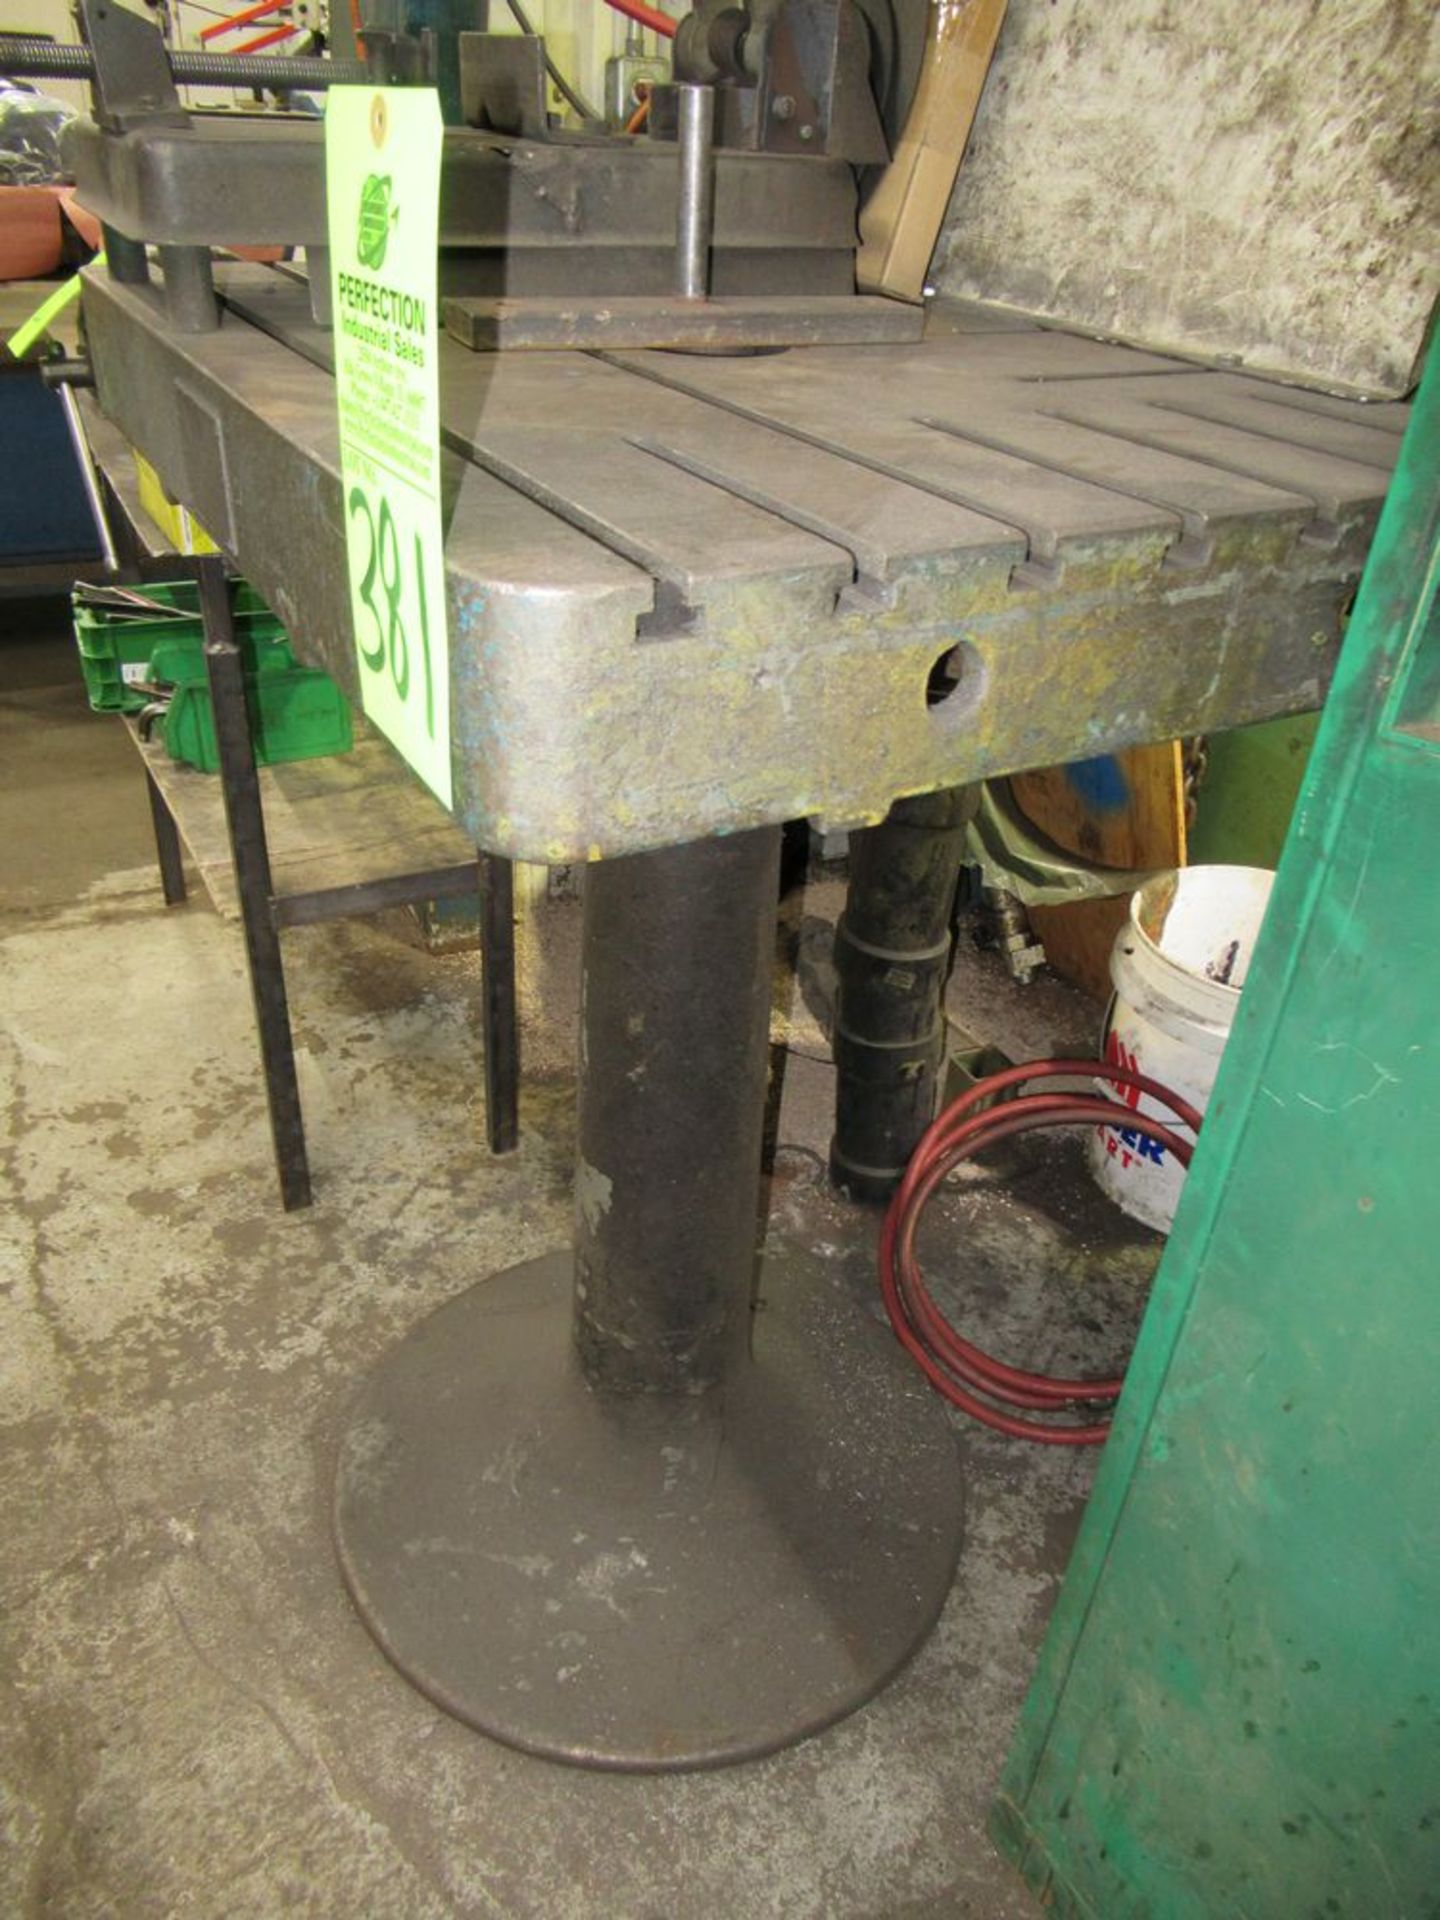 Pedestal T-Slot Welding Table Approx. 24 x 30" ($75 Rigging Cost)